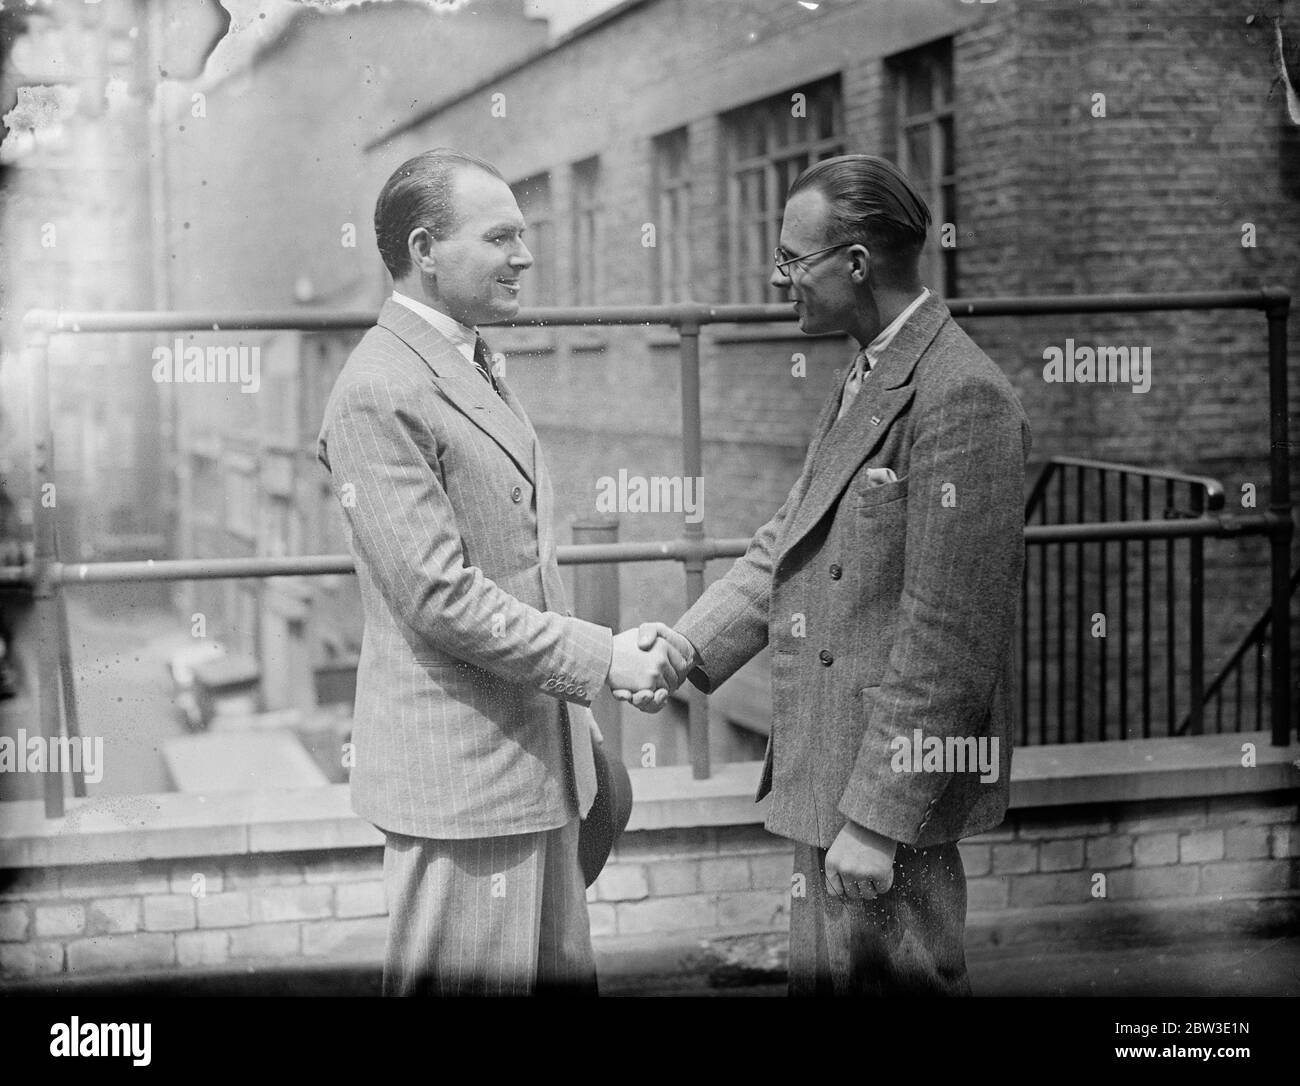 World ' s showmen no 1 is a Londoner . Mr John Armstrong ( Left ) , a London advertising expert has had the title of ' World showmen No 1 conferred on him by America . 7 August 1935 Stock Photo